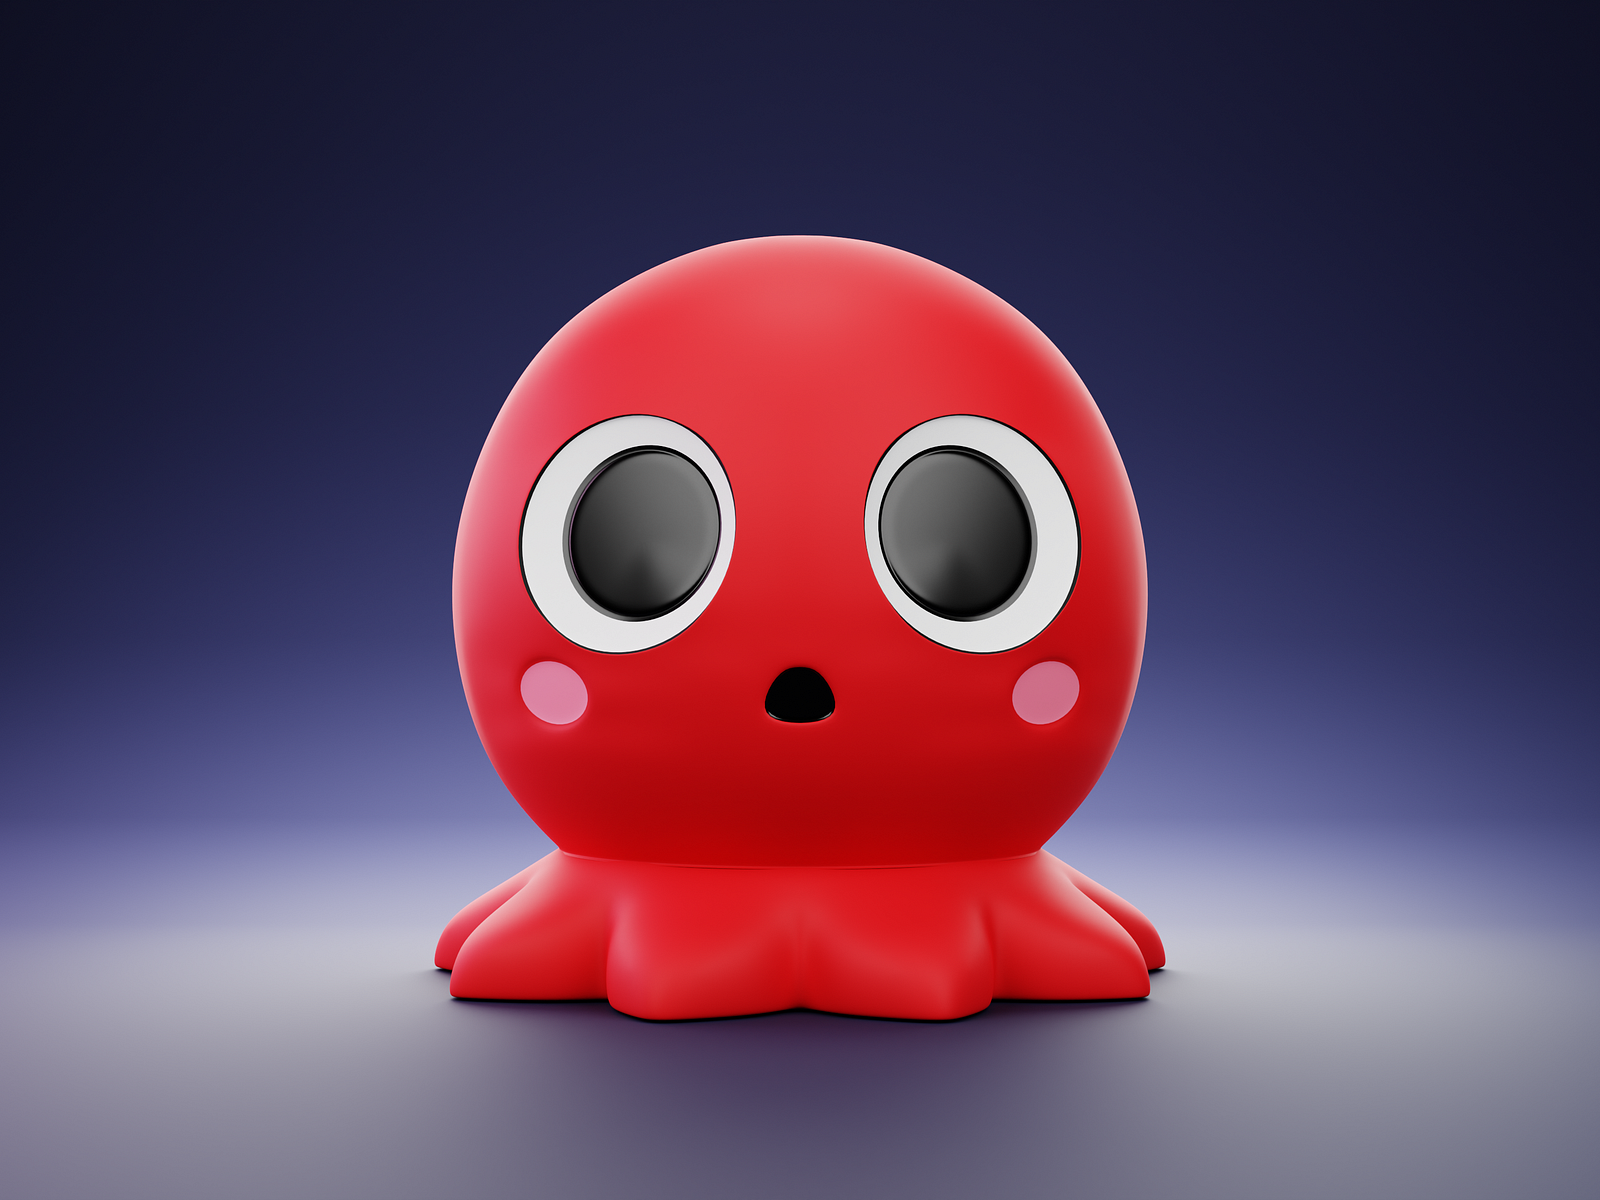 Octopus plush 3D model by Giovanni Tassiano on Dribbble